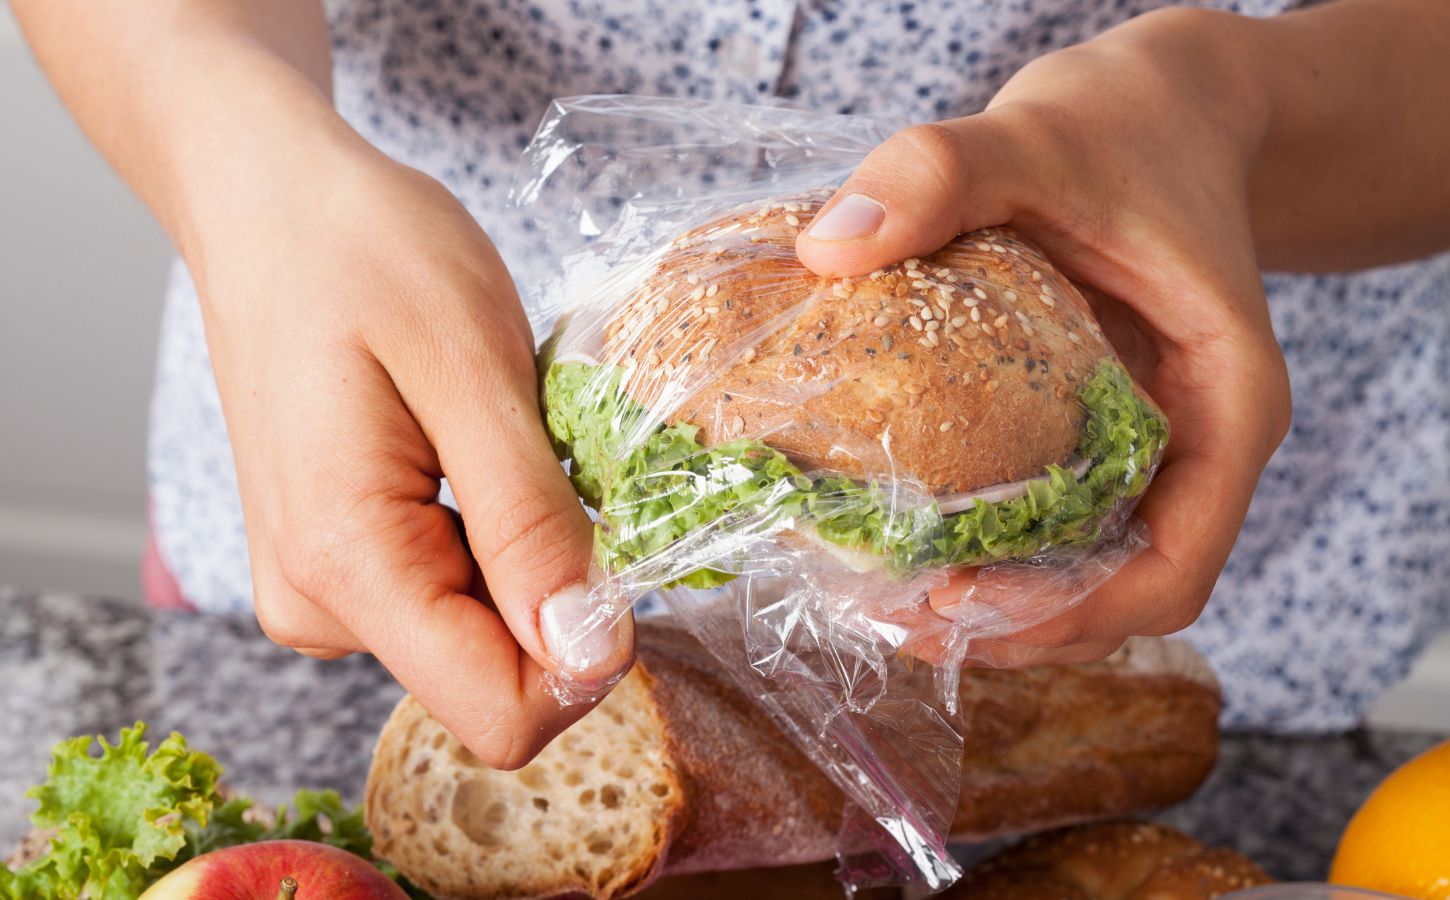 Photo shows someone's hands as they wrap a sandwich in a plastic Ziploc-style sandwich bag